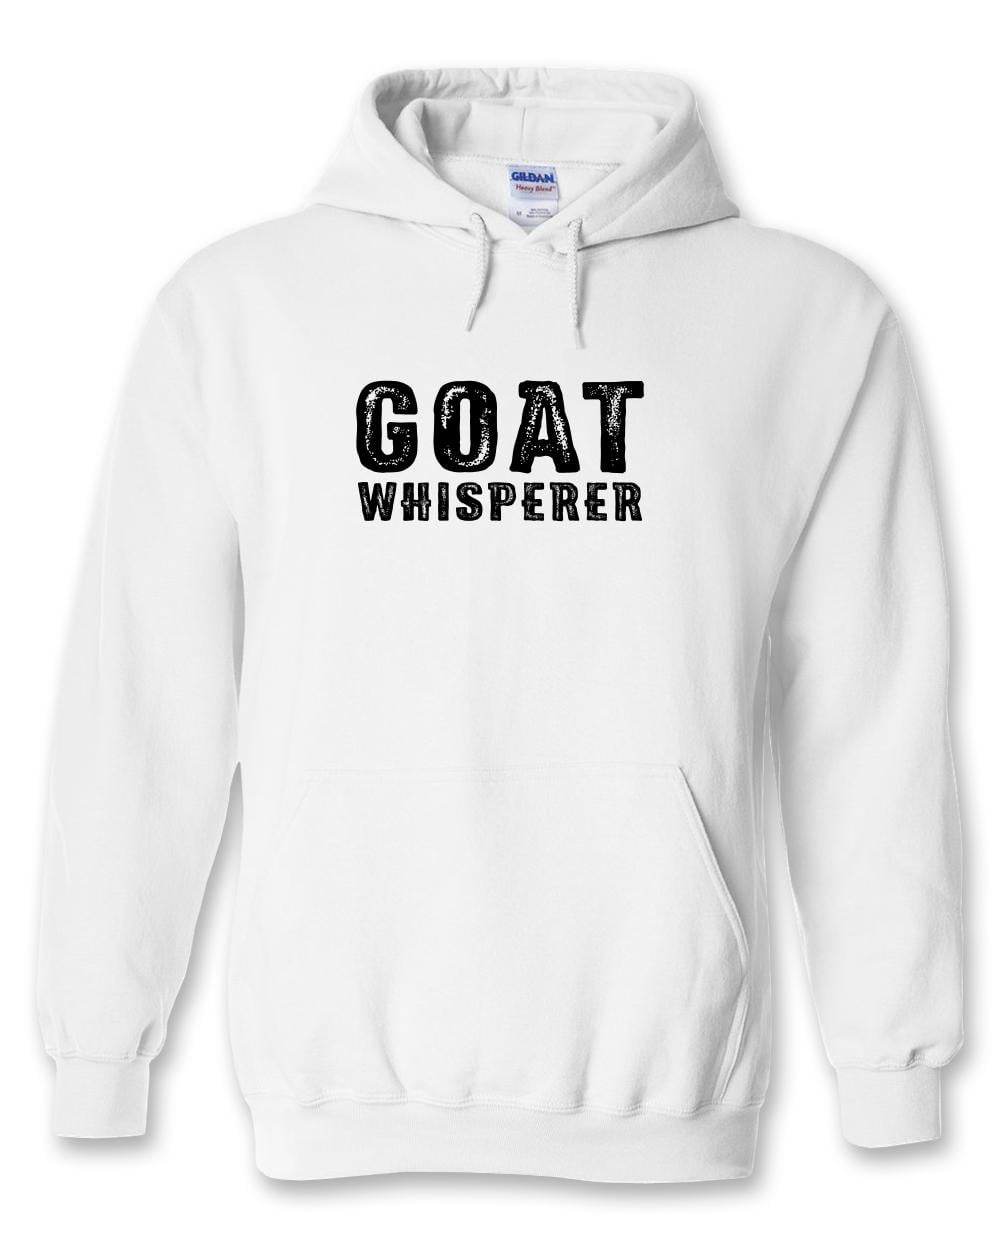 What You Would Call A Spaghetti Whisperer Hoodie